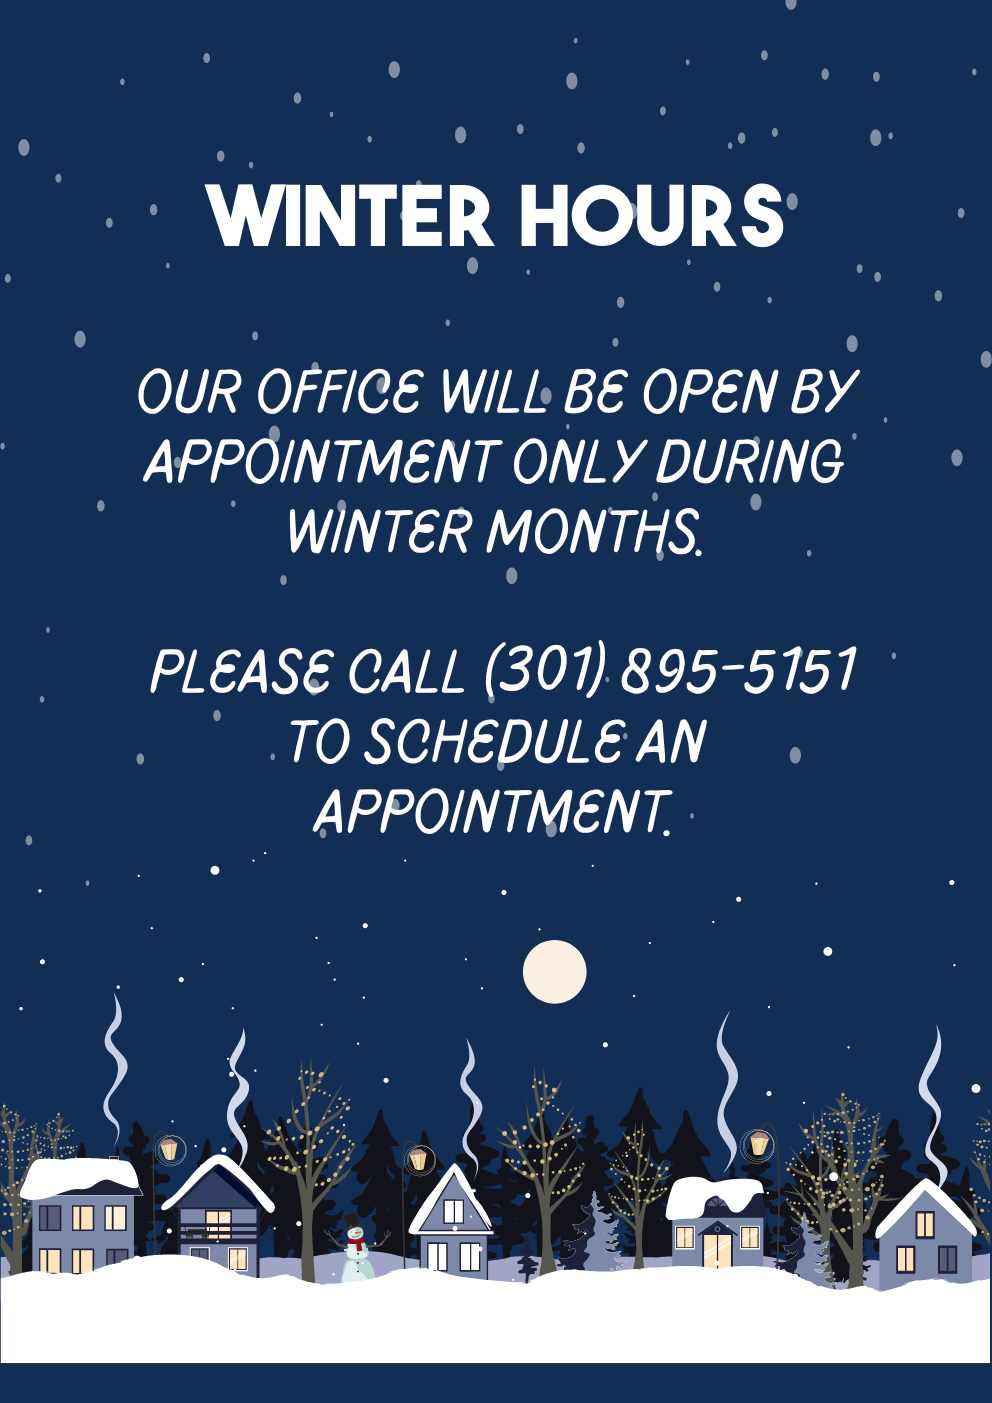 Our office will be open by appointment only during winter months. Please call (301) 895-5151 to schedule an appointment.